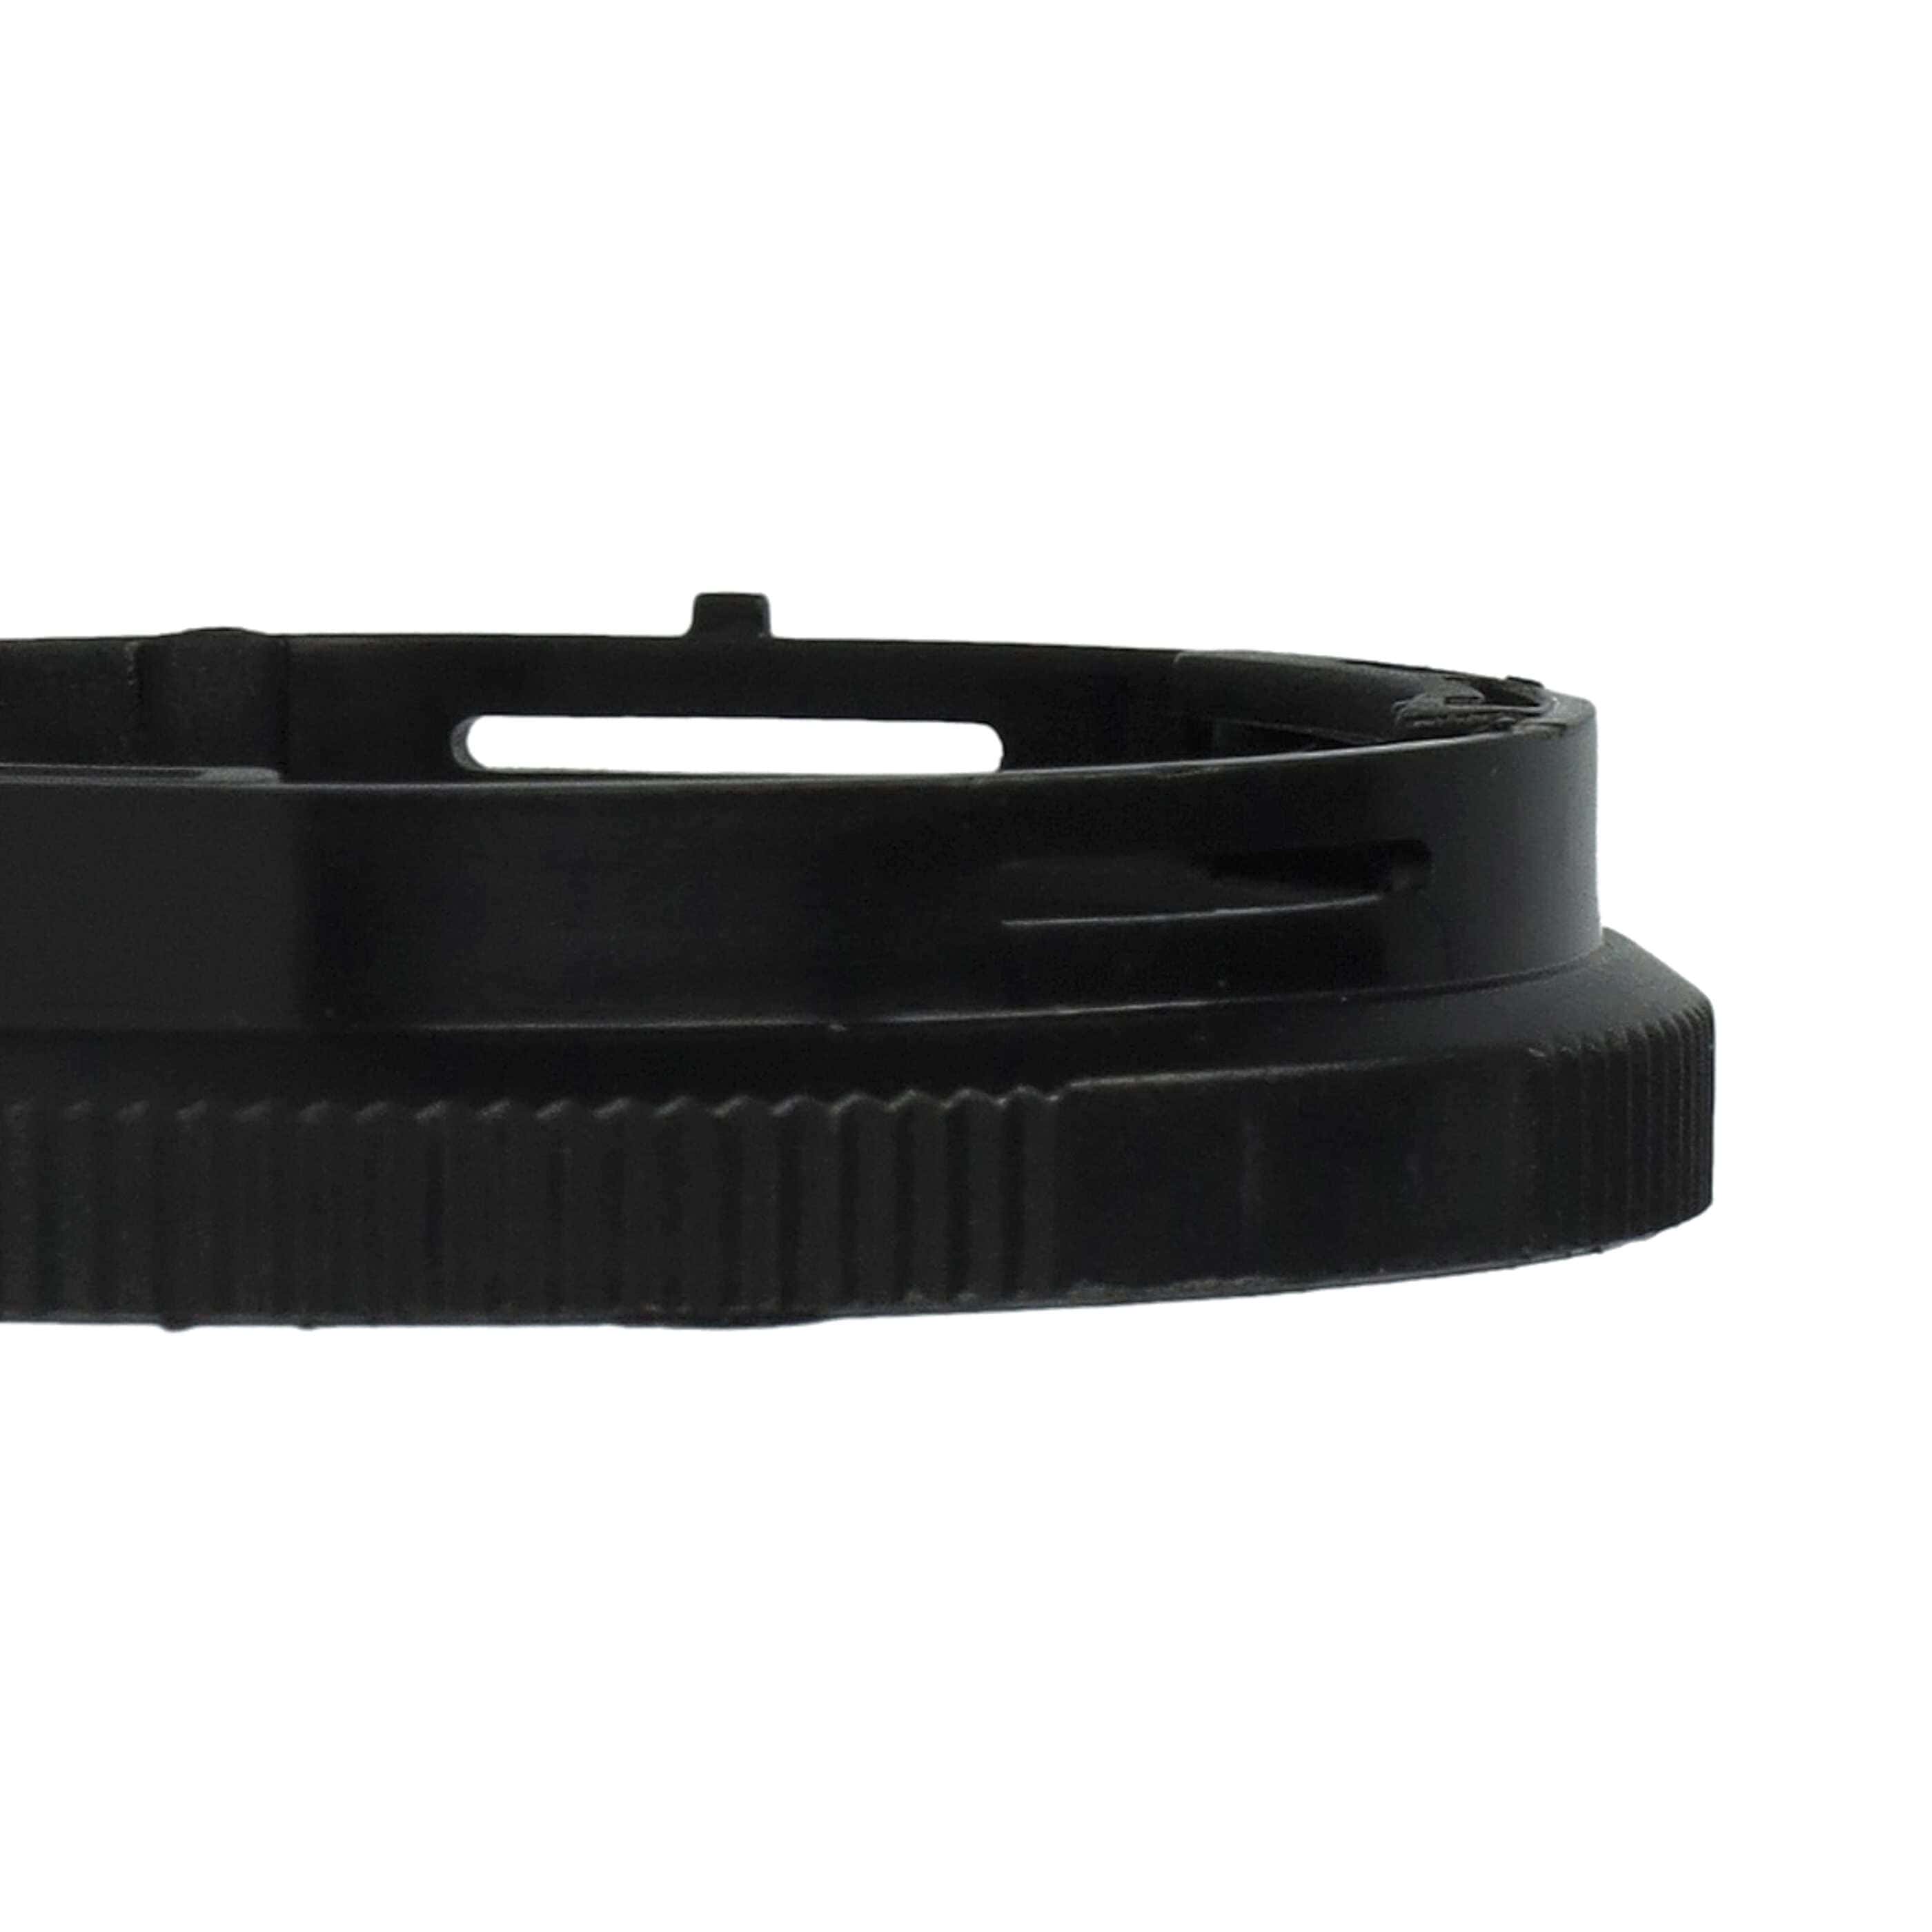 40.5 mm Filter Adapter replaces Olympus RN-T01 for Camera Lens